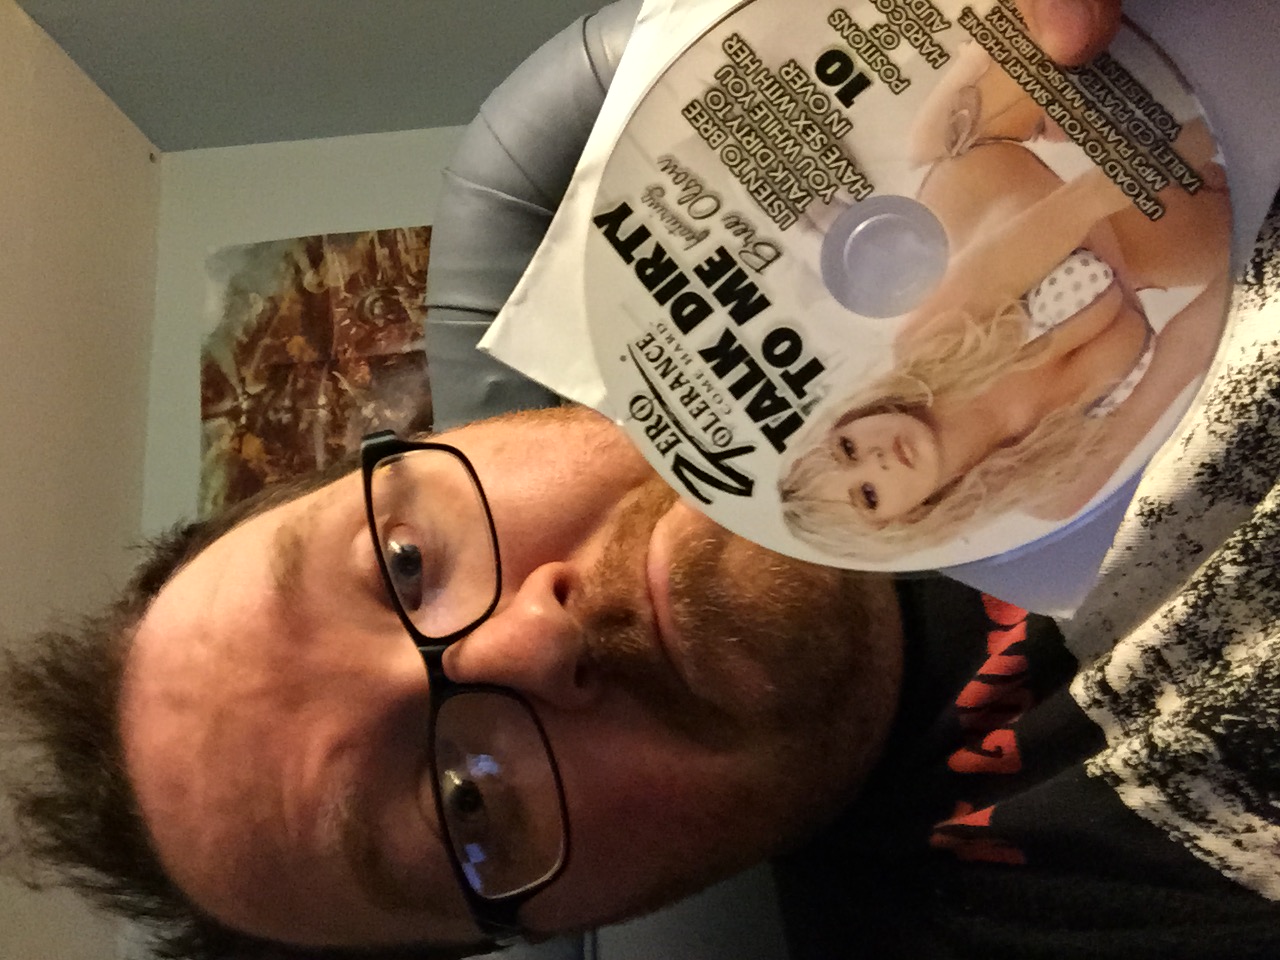 H to the C: Talk Dirty to Me - Sound Porn CD Review